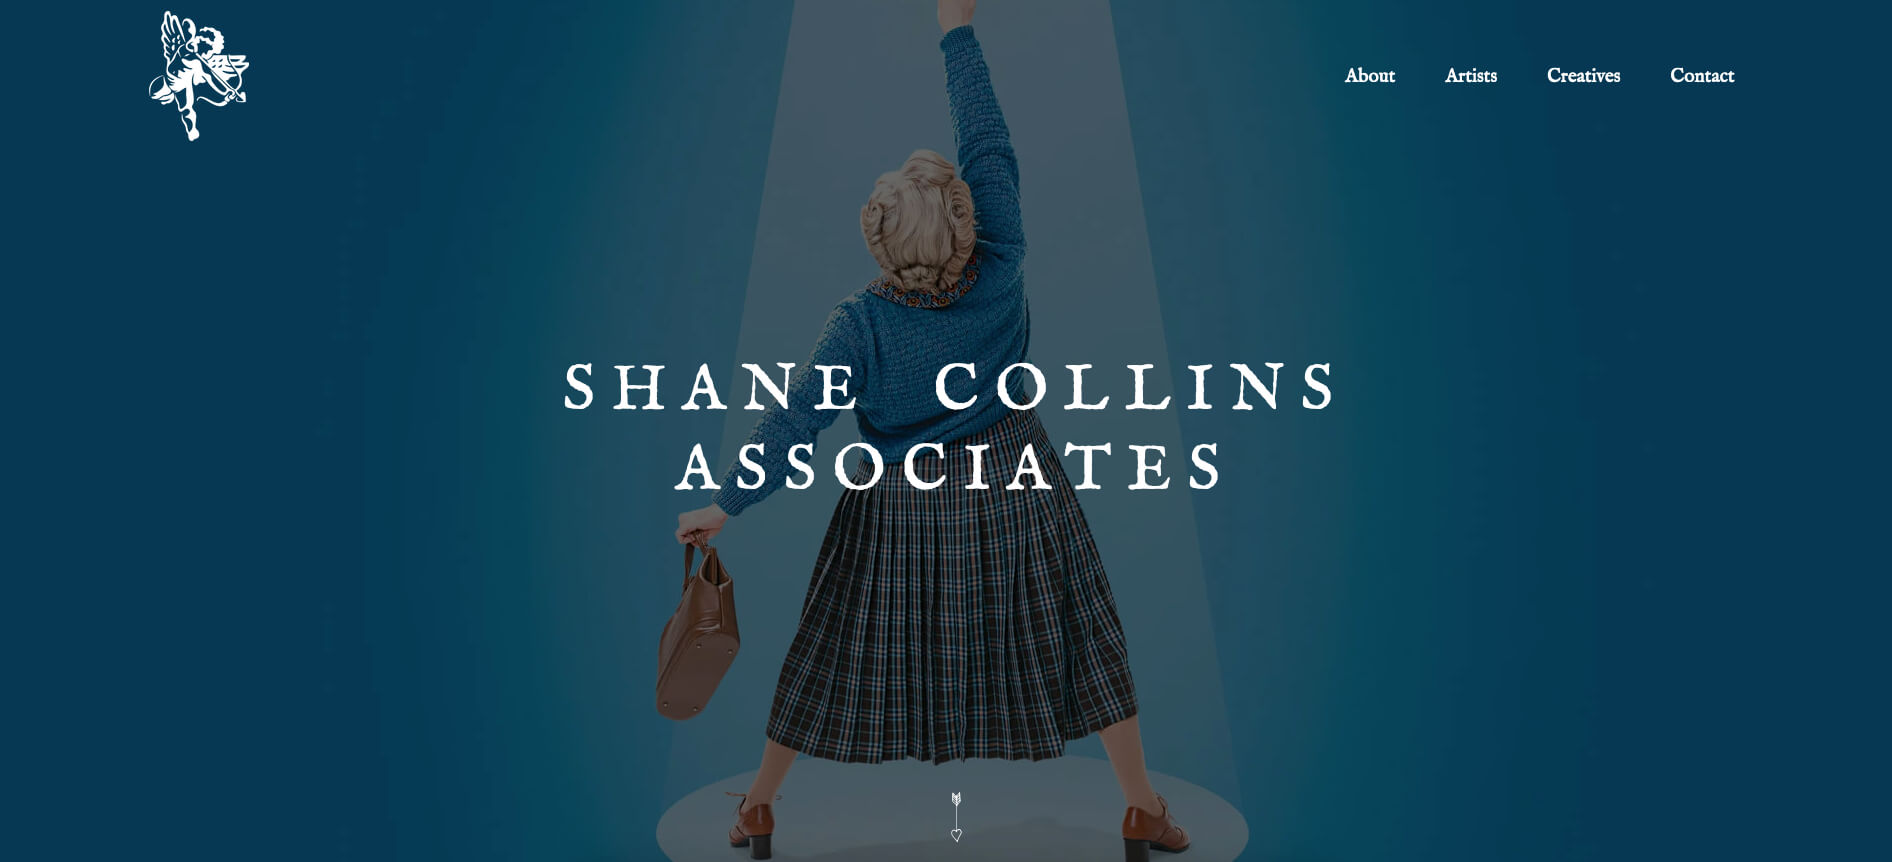 shane collins website of the month